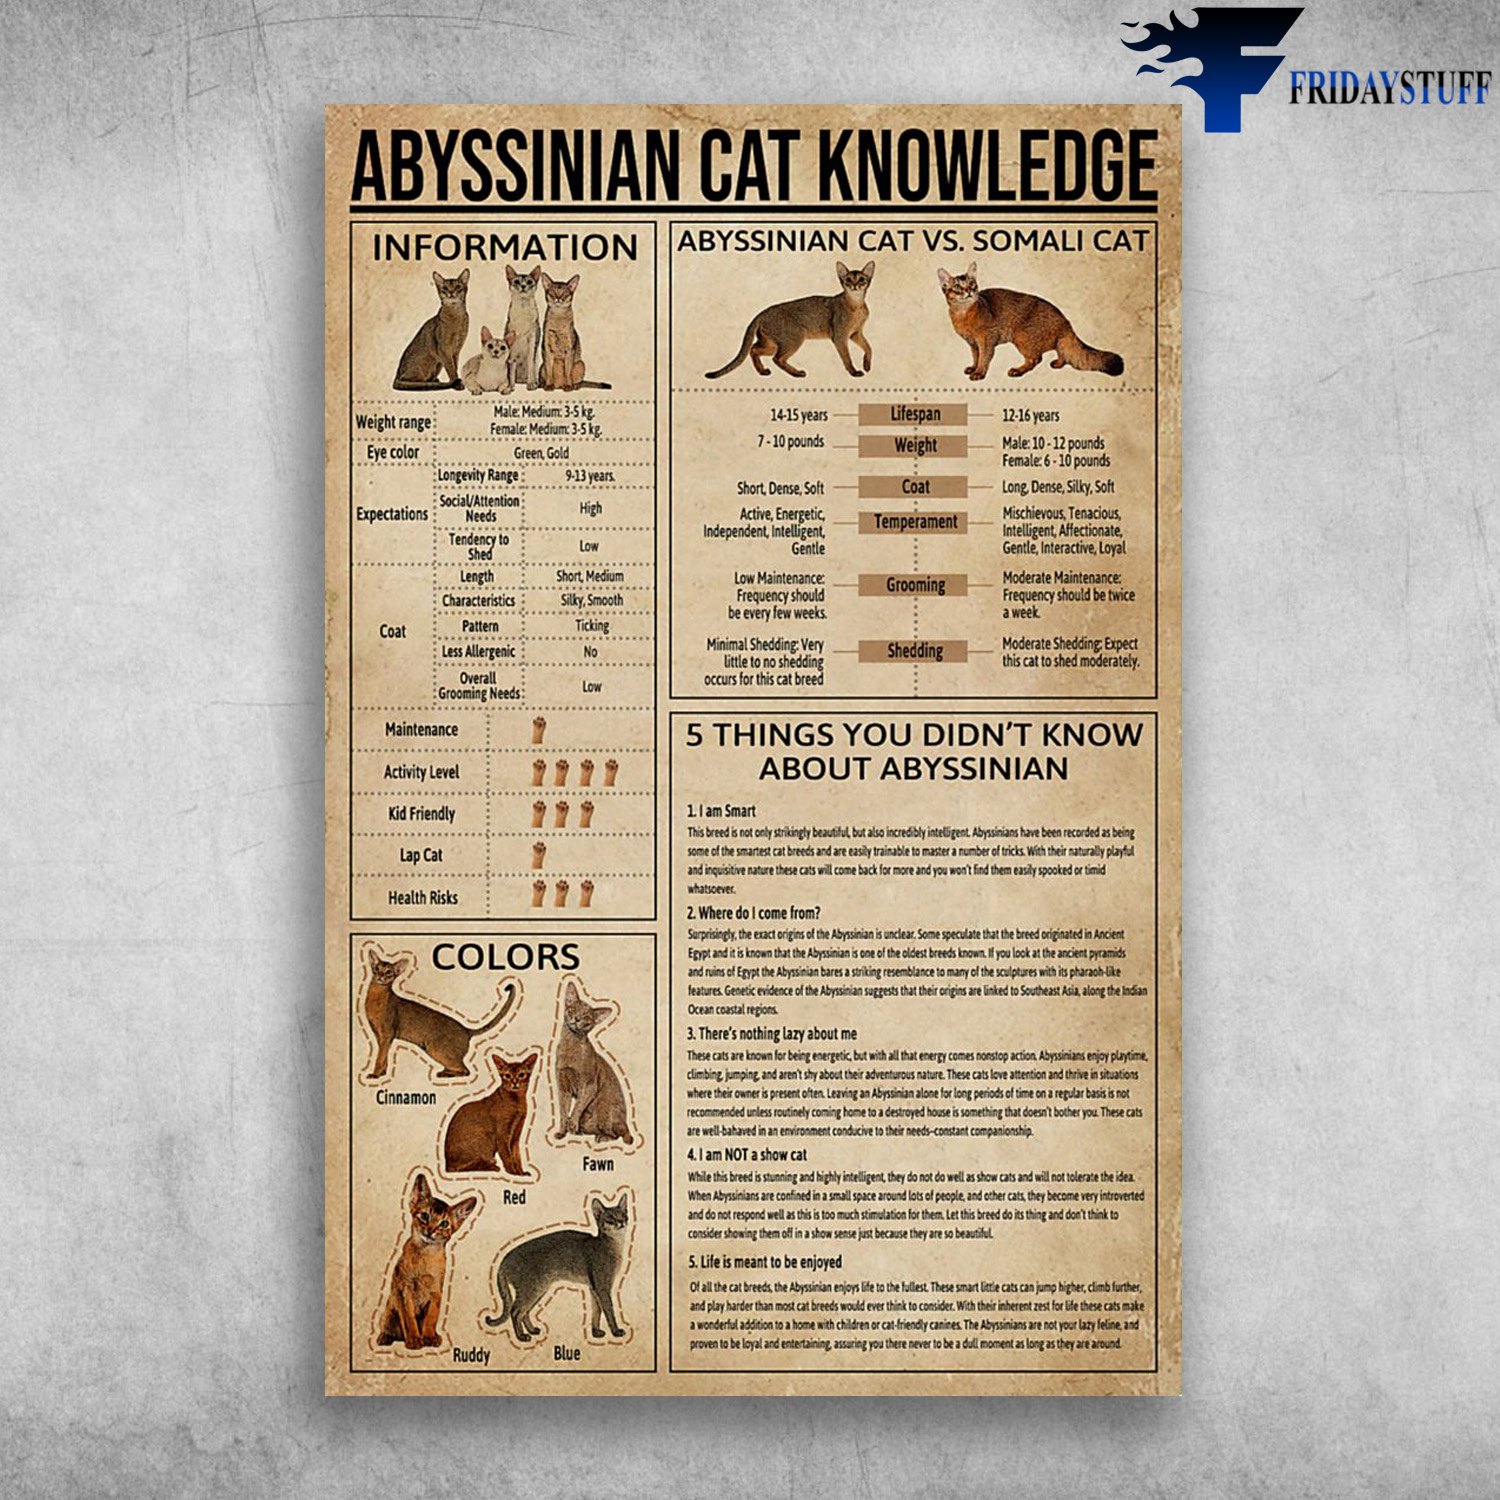 The Knowledge Of Abyssinian Cat - The Infomation, The Color, Abyssinian Vs. Somali Cat, 5 Things You Didn't Know About Abyssinian